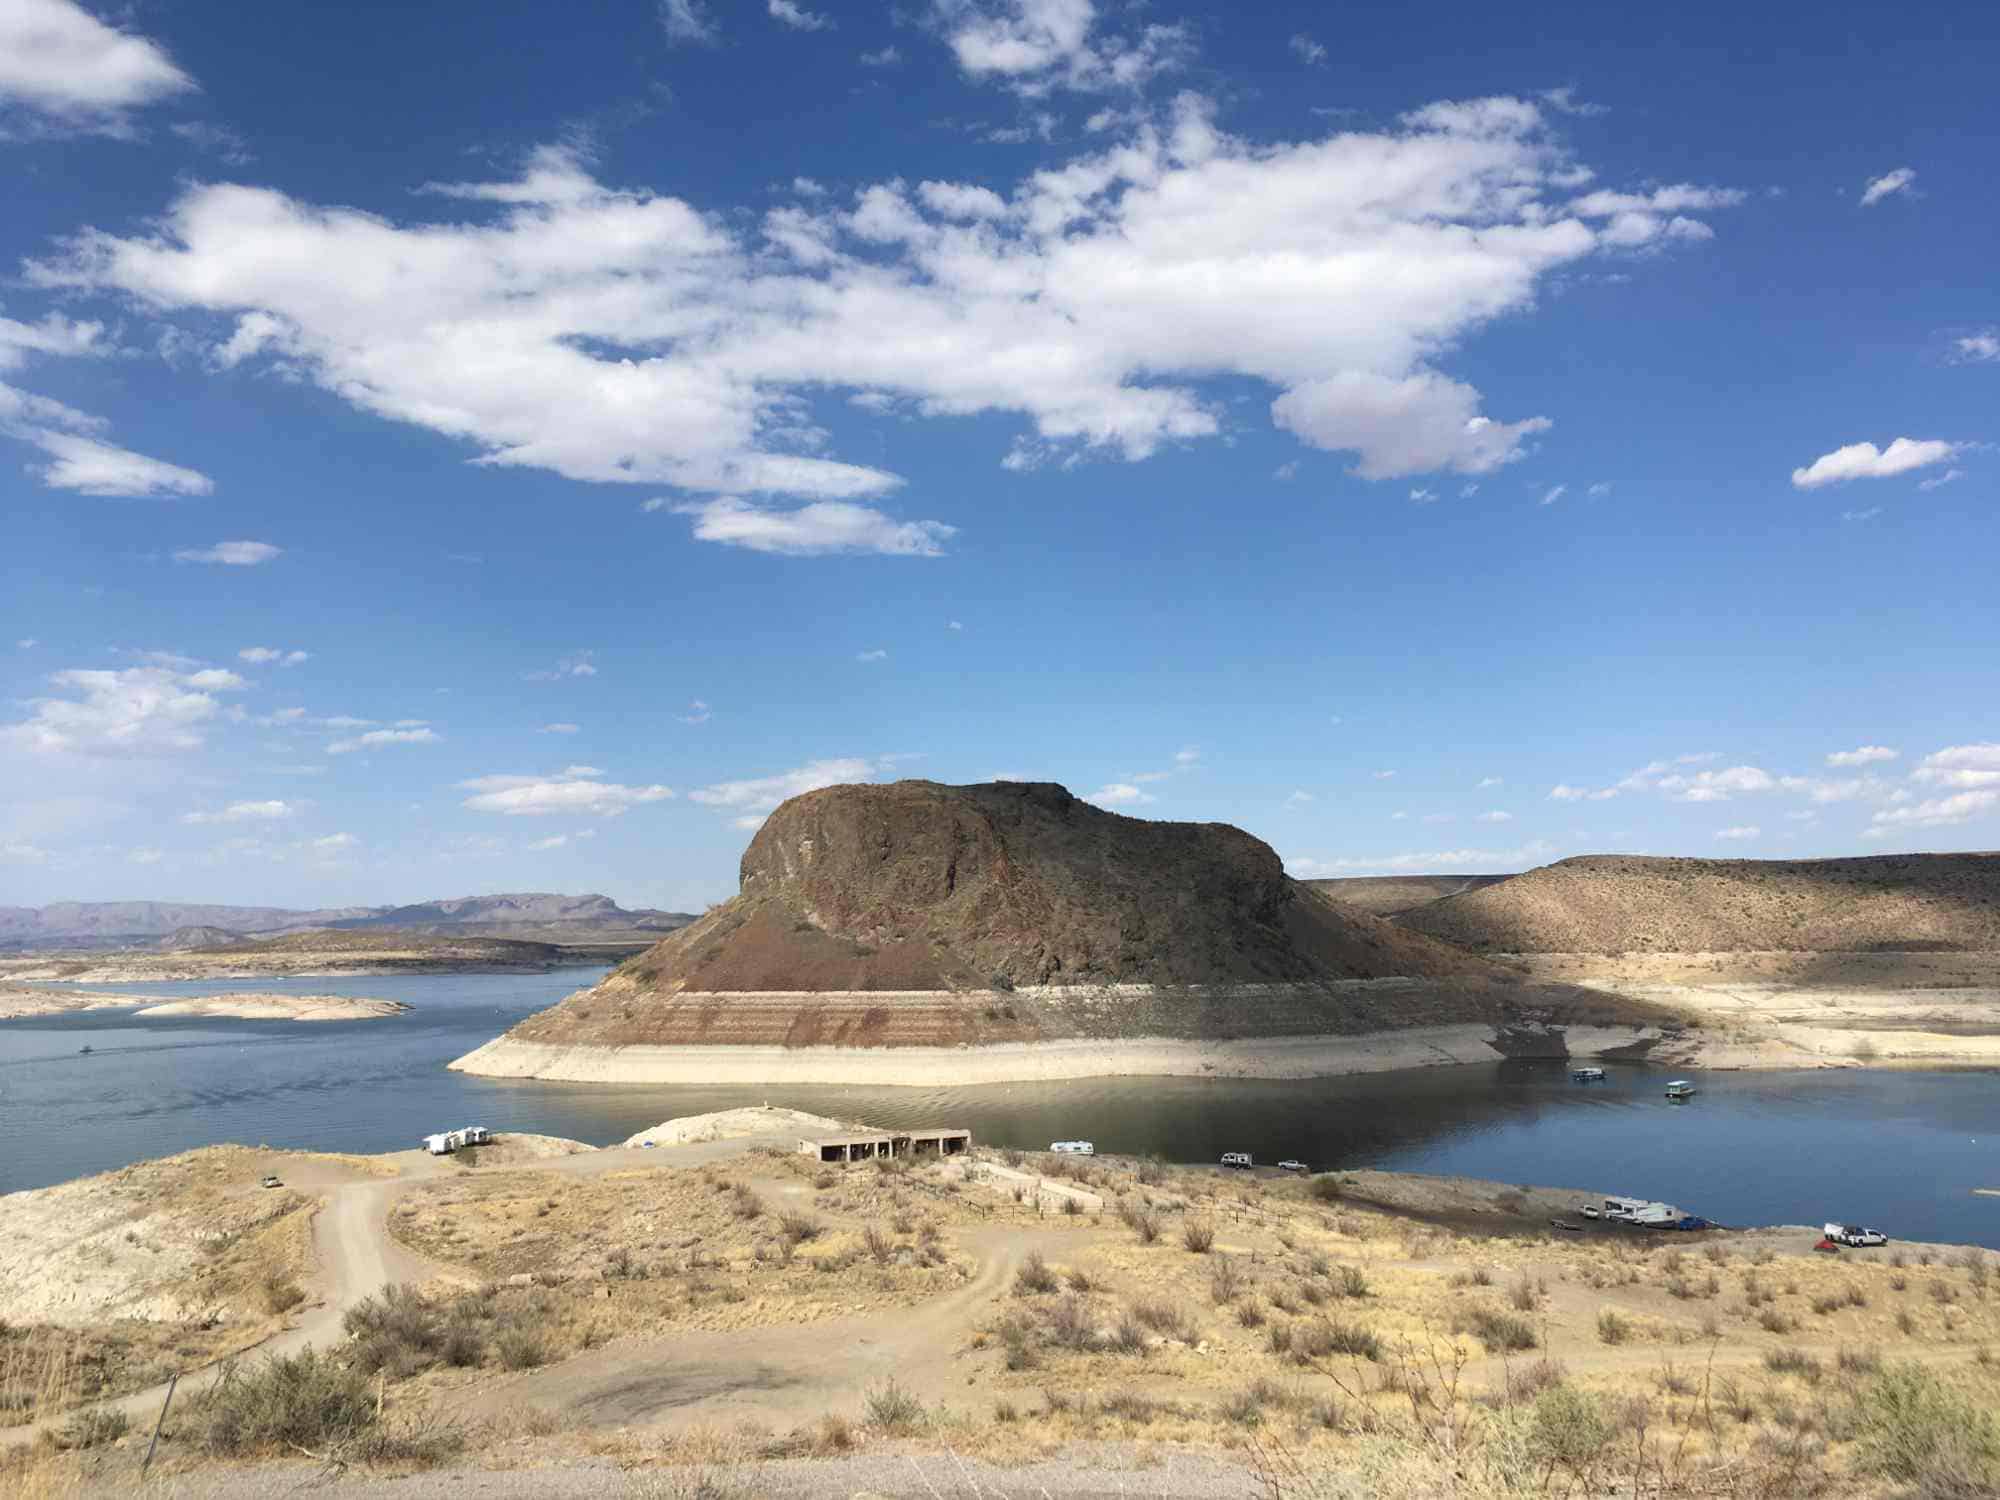 The Elephant Butte Lake building that is not always underwater near the Elephant Butte